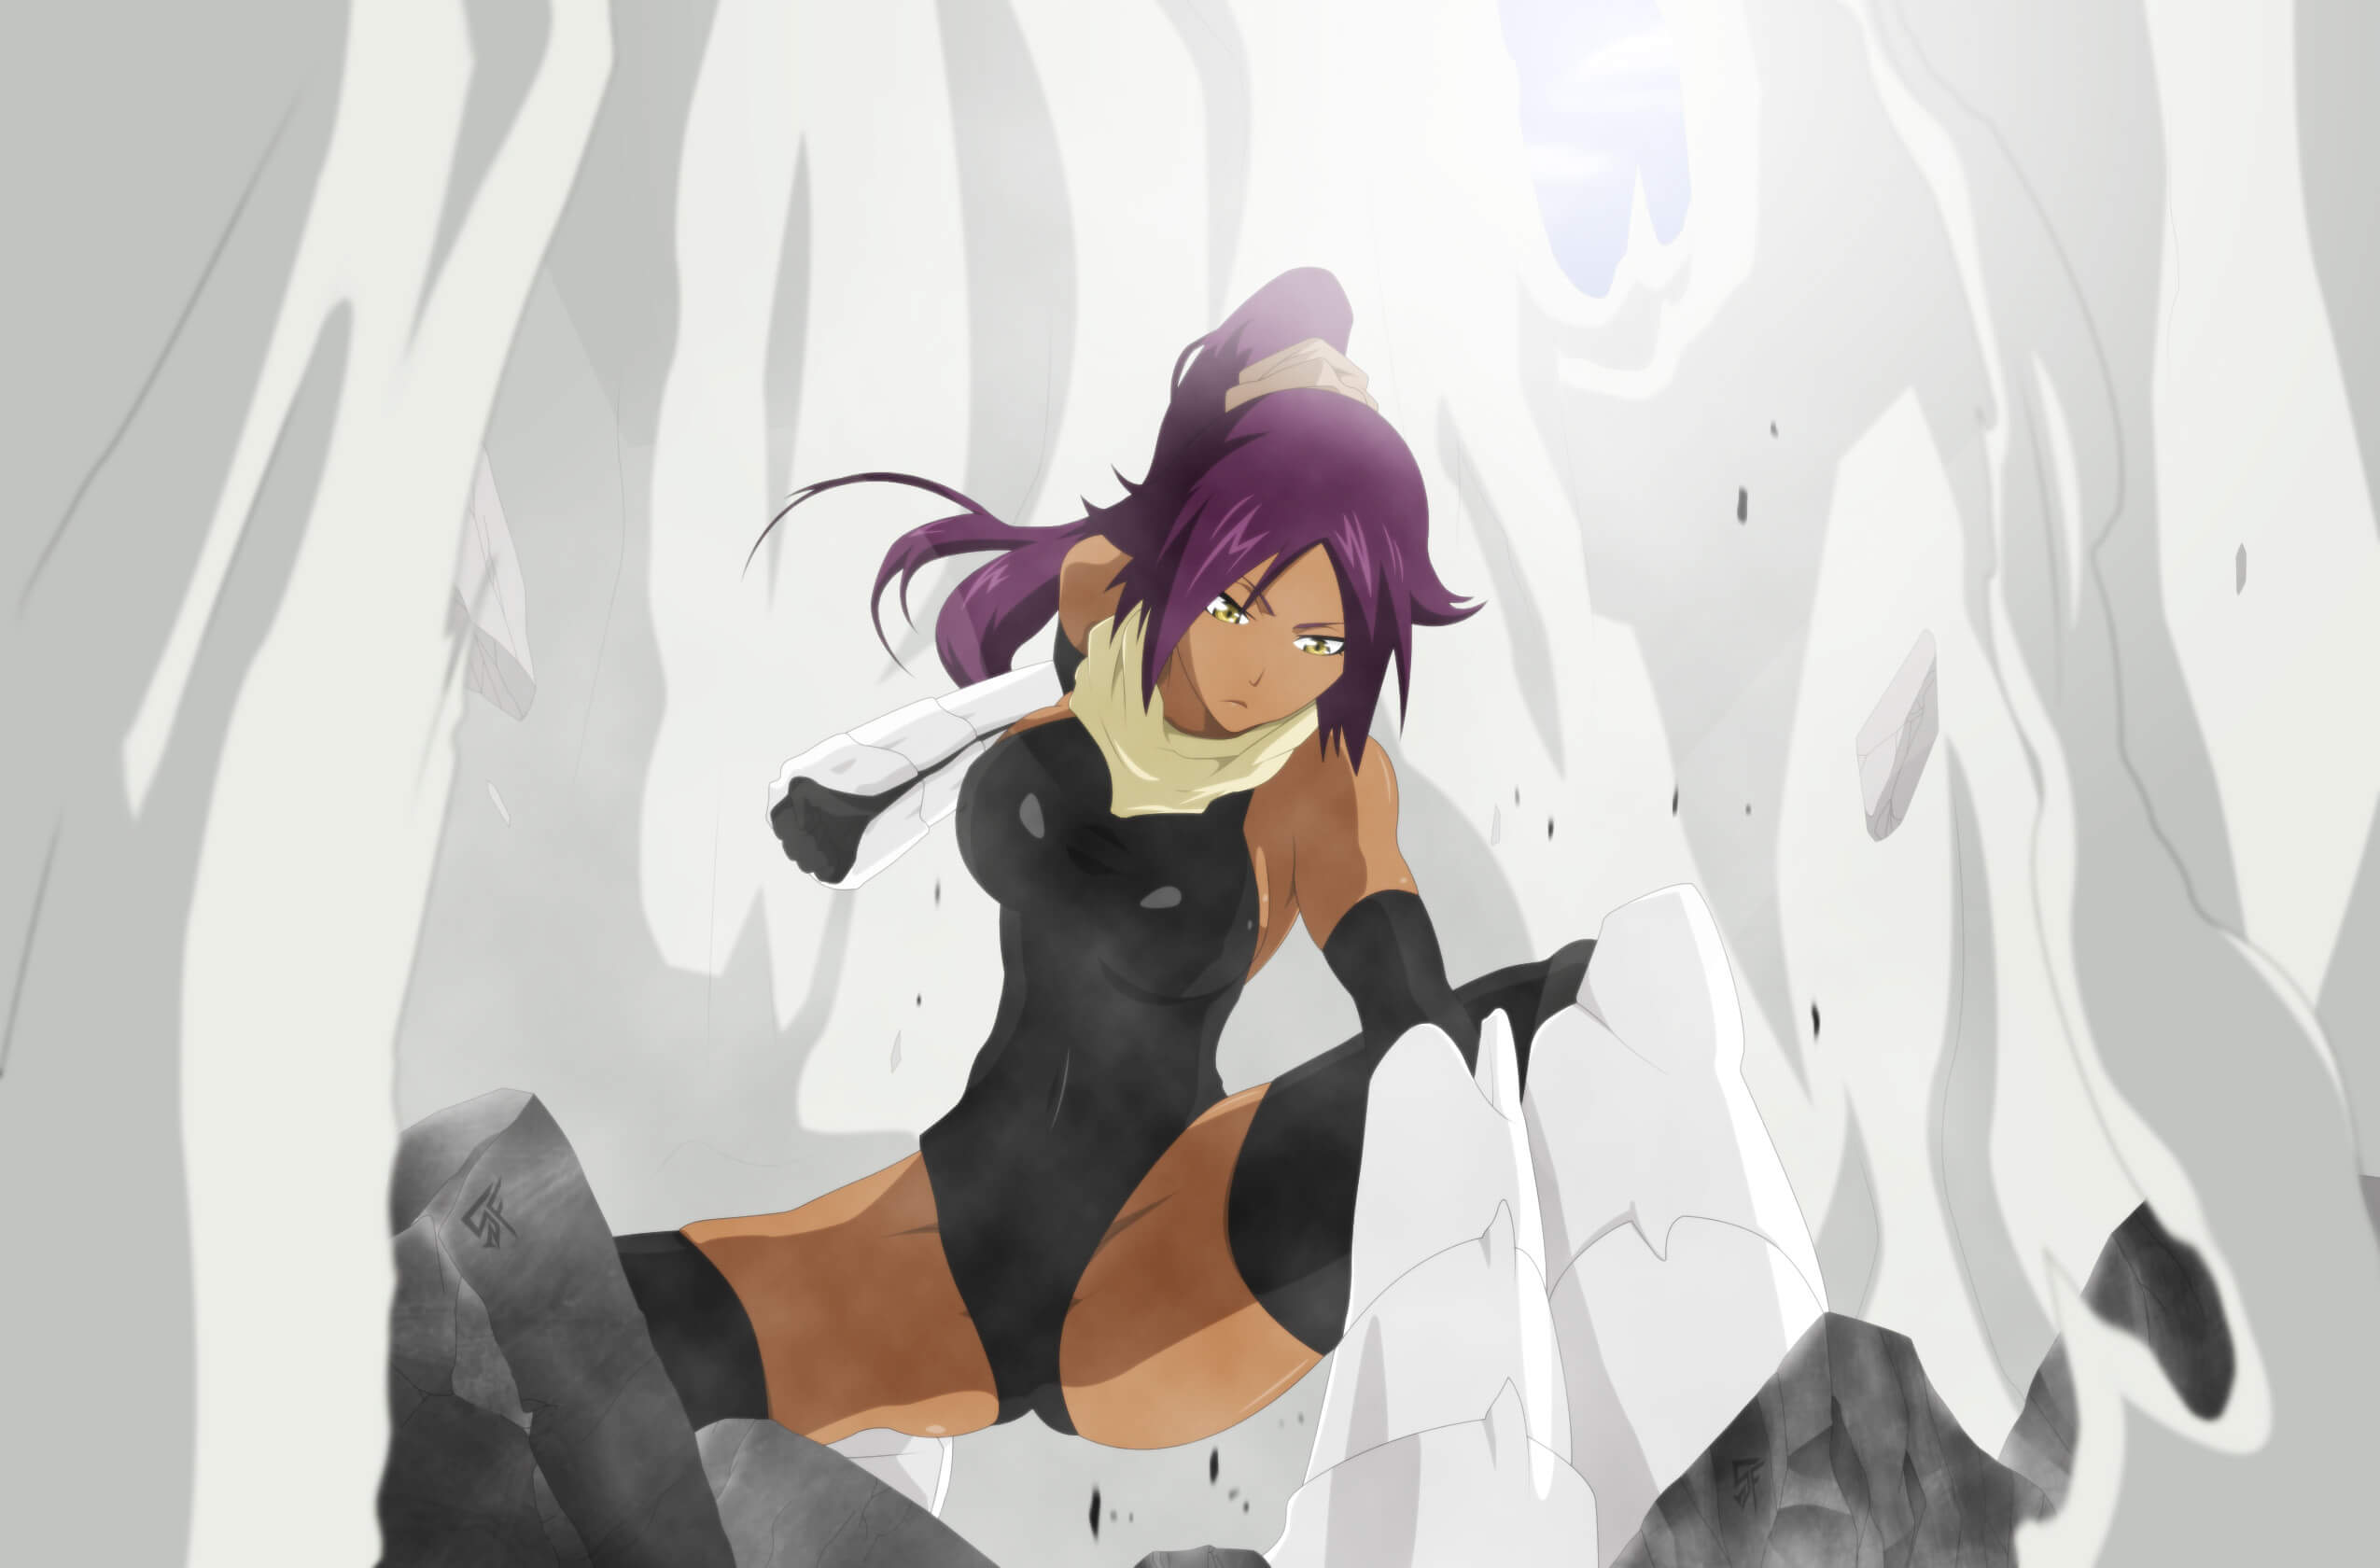 35 Hot Pictures Of Yoruichi Shihouin From The Bleach Anime Which Are Stunningly Ravishing | Best Of Comic Books